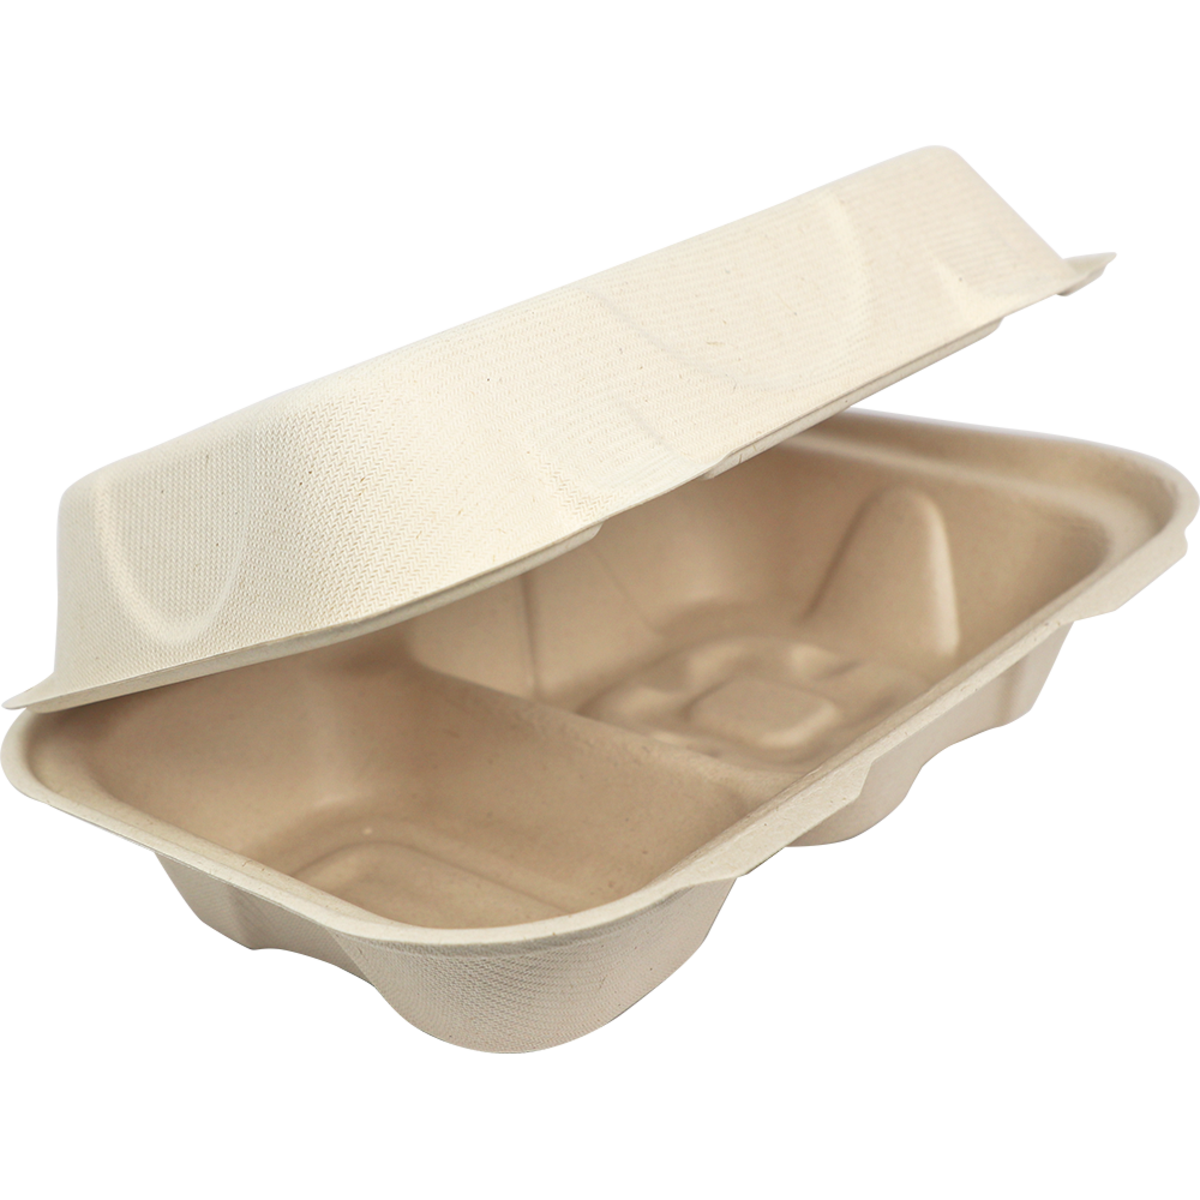 9" x 6" x 3" Clamshell Two Compartment | Natural Plant Fiber (Pack of 50)